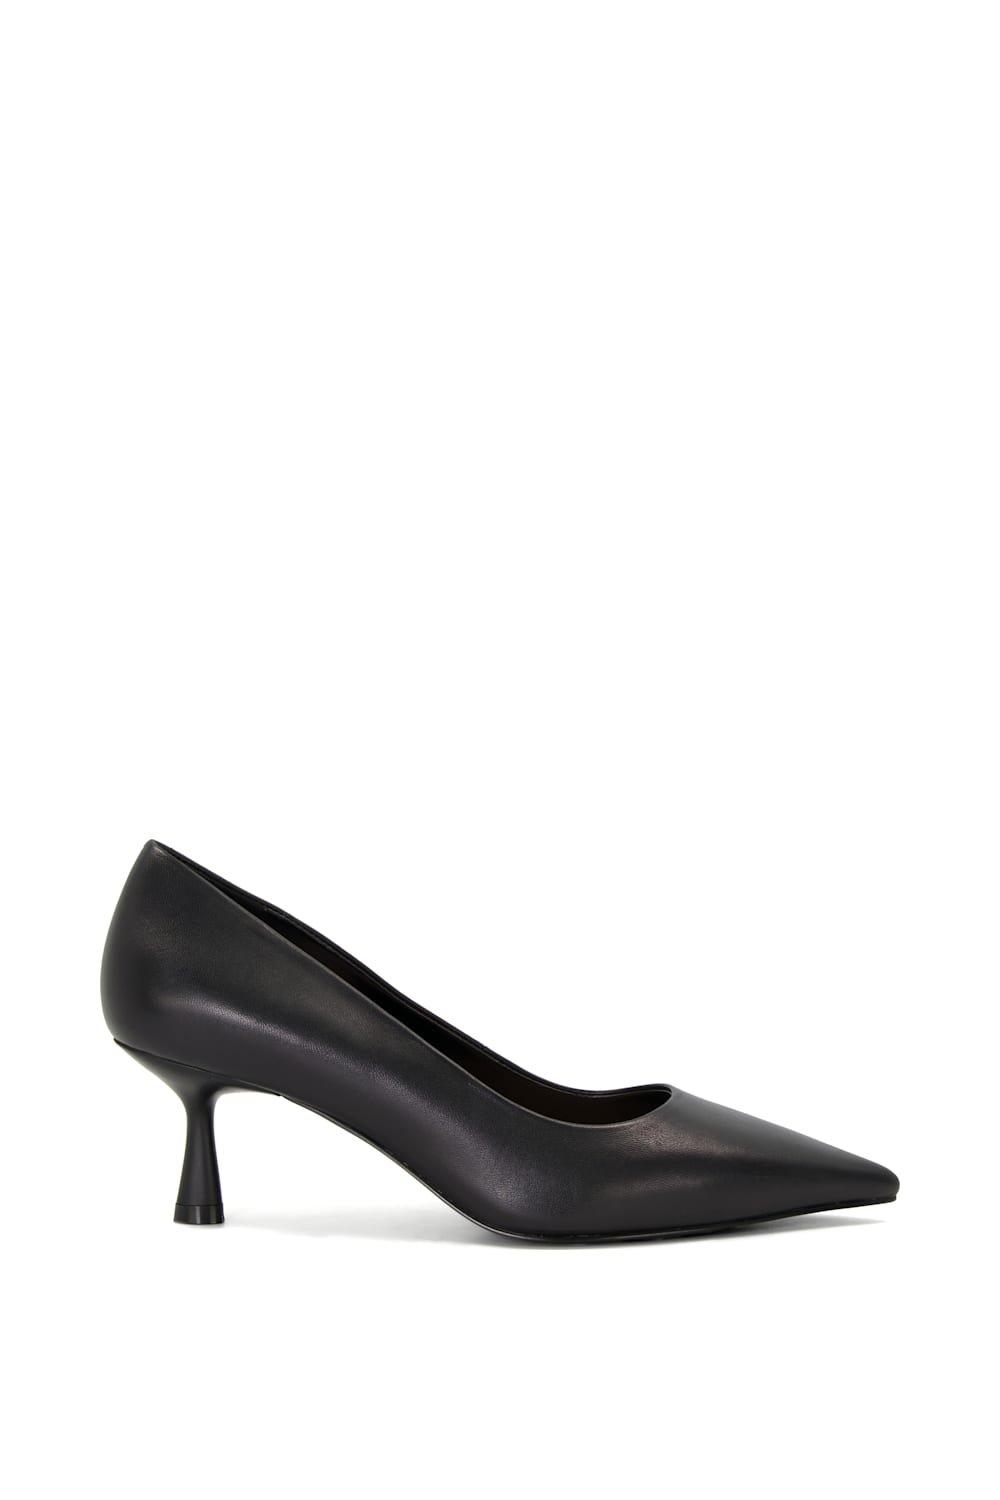 'Angelina' Leather Court Shoes